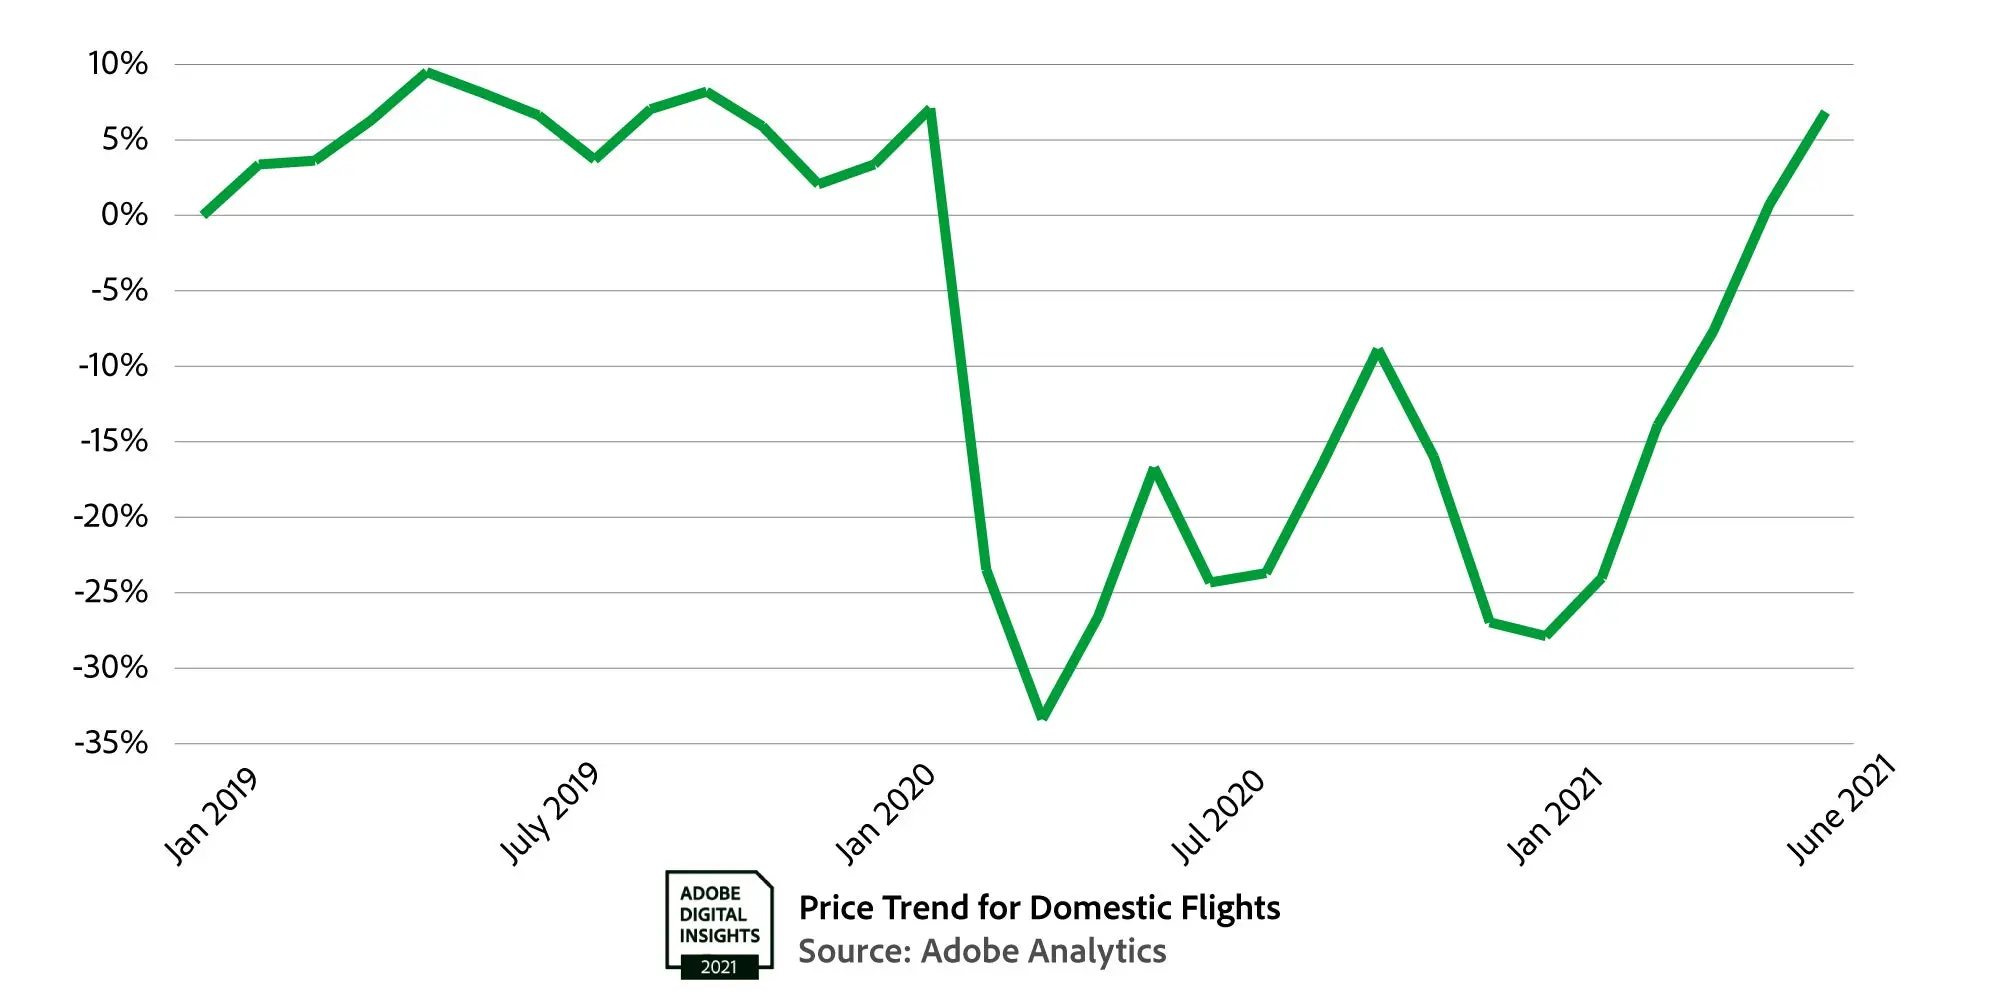 Price trend for domestic flights. 